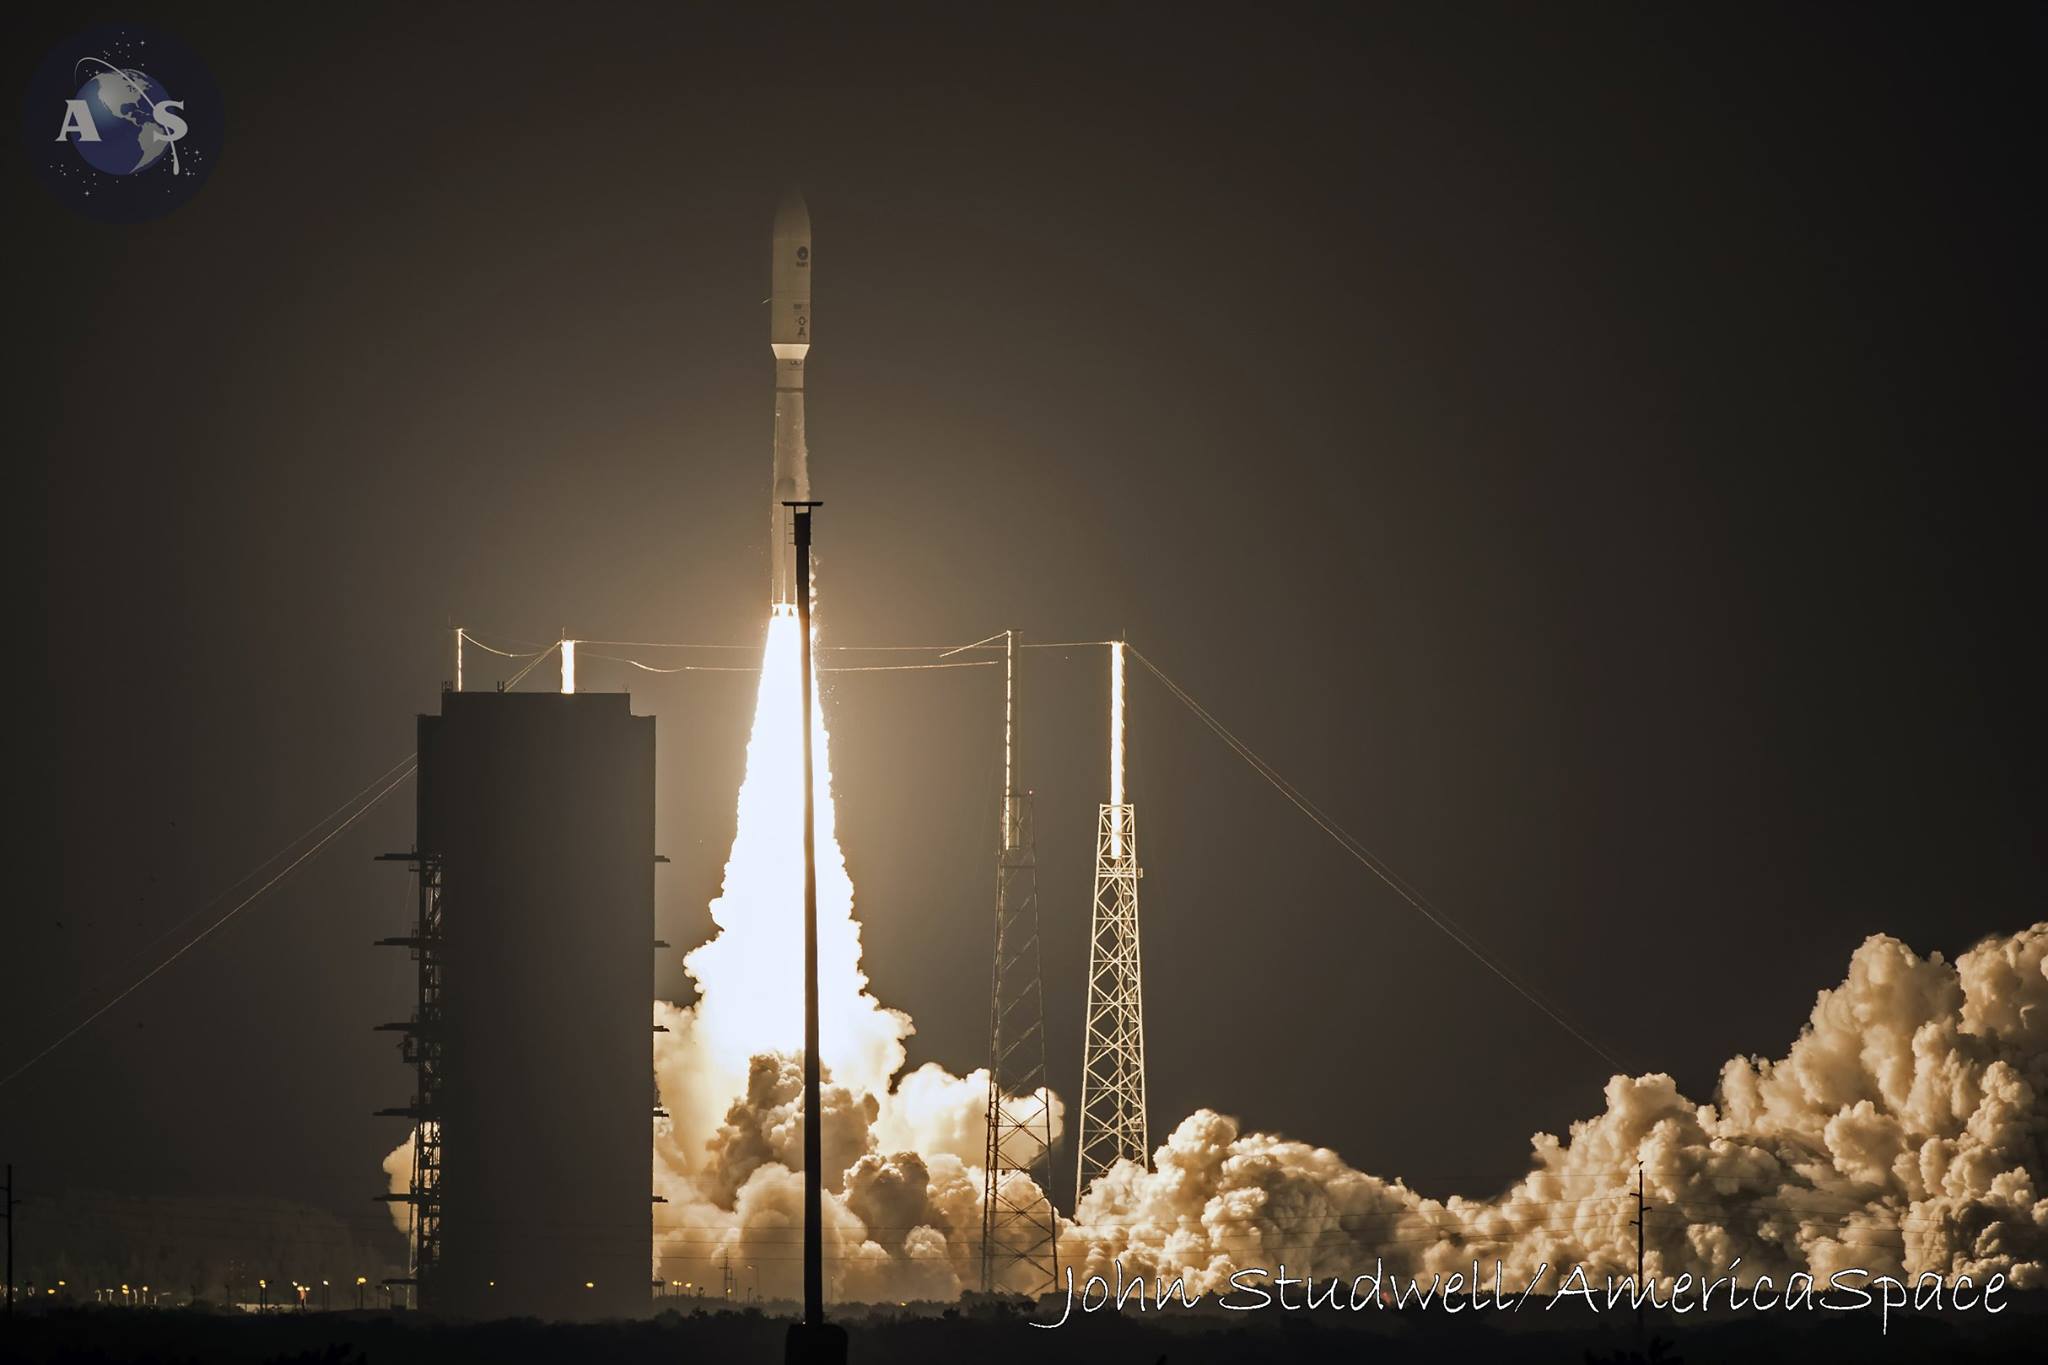 A ULA Atlas-V 551 rocket launches the Navy's MUOS-4 satellite to orbit from Cape Canaveral, Fla. Sep. 2, 2015. Photo Credit: John Studwell / AmericaSpace